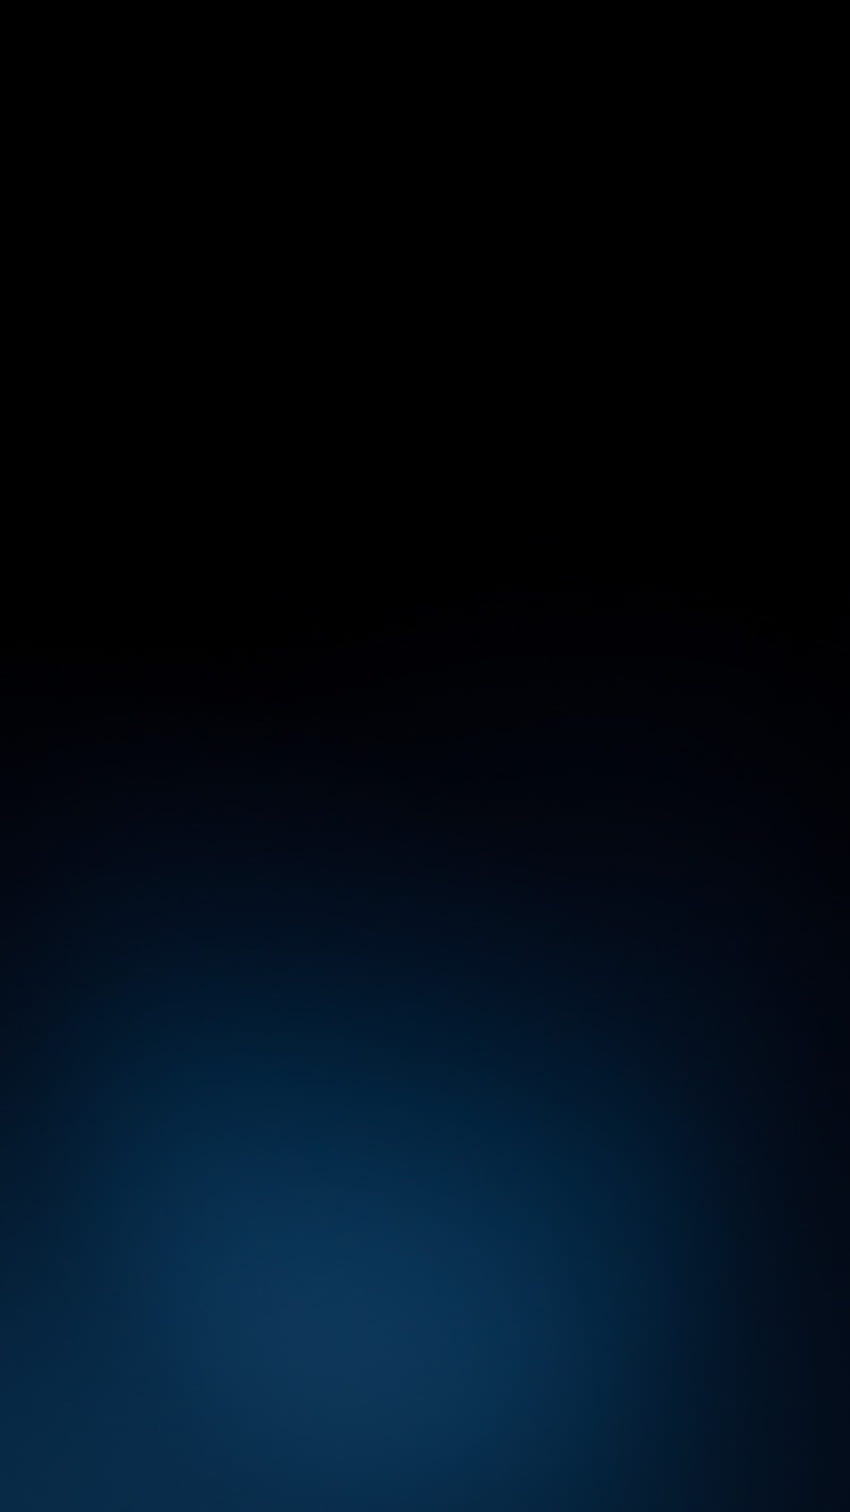 Here's my version of that red/black gradient that's so popular...only in  blue.: iphone, black and blue iphone HD phone wallpaper | Pxfuel